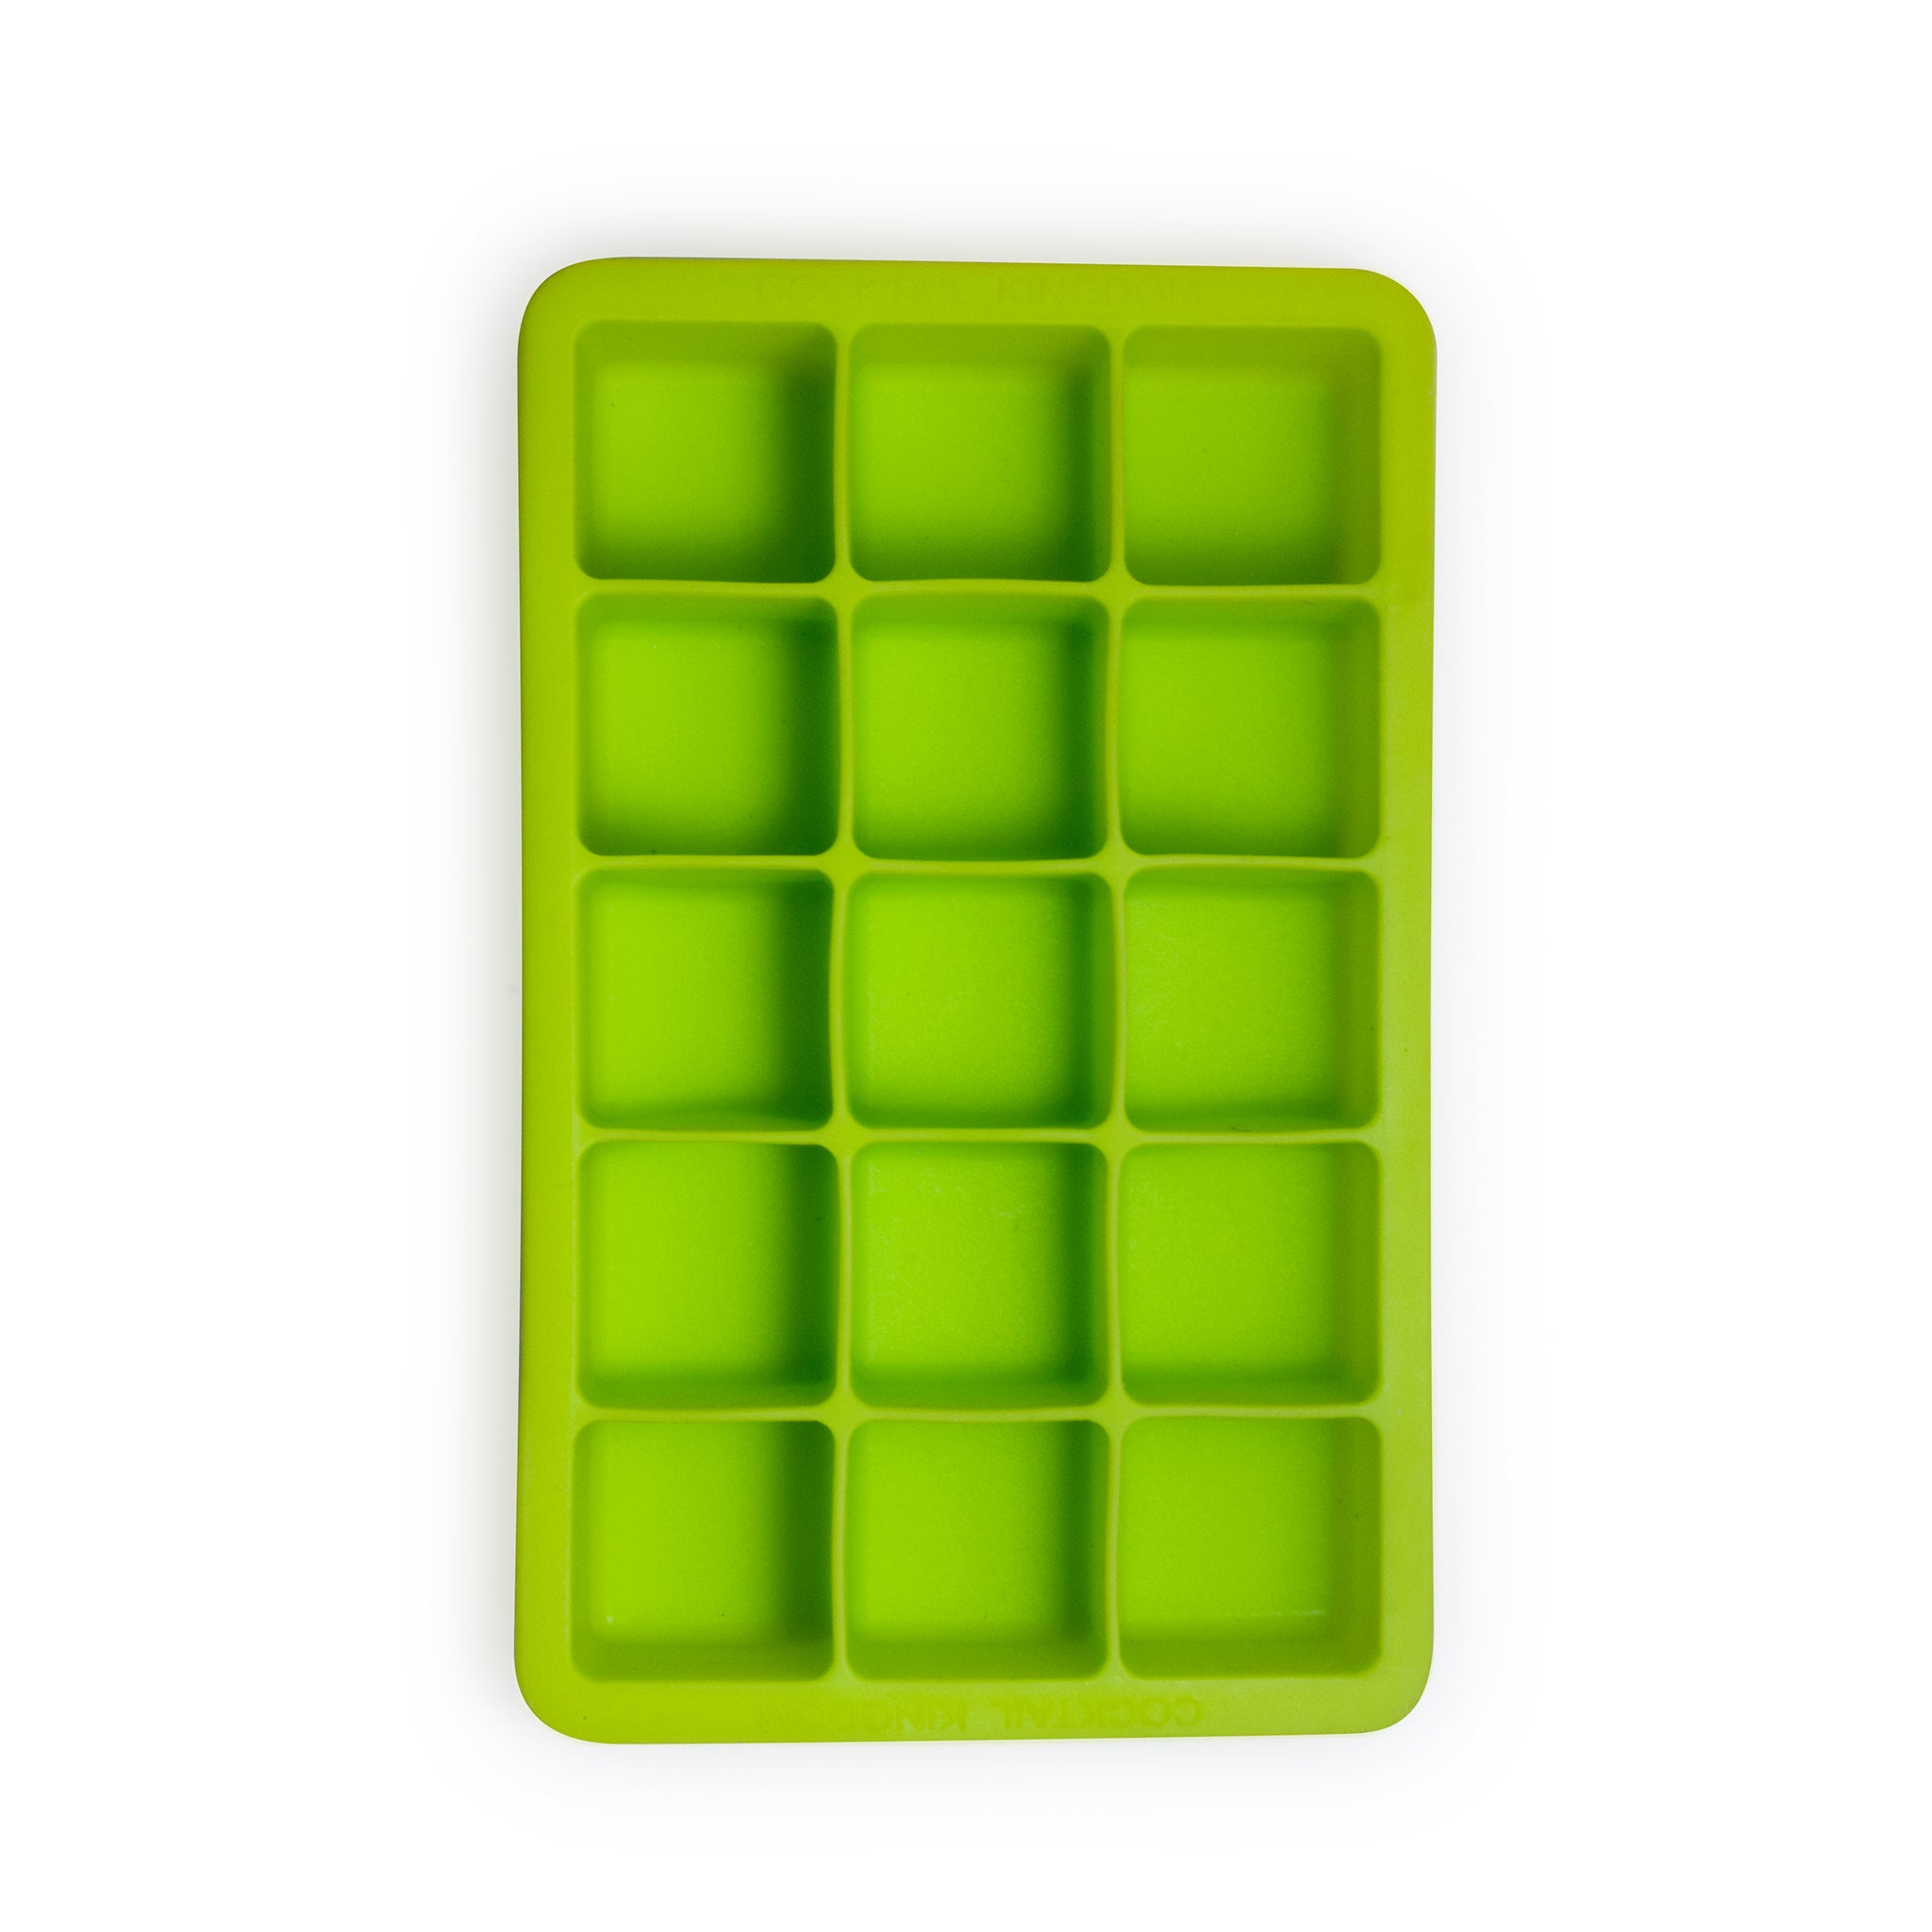 Condo Blues: One Small Green Change: Silicone Ice Cube Trays